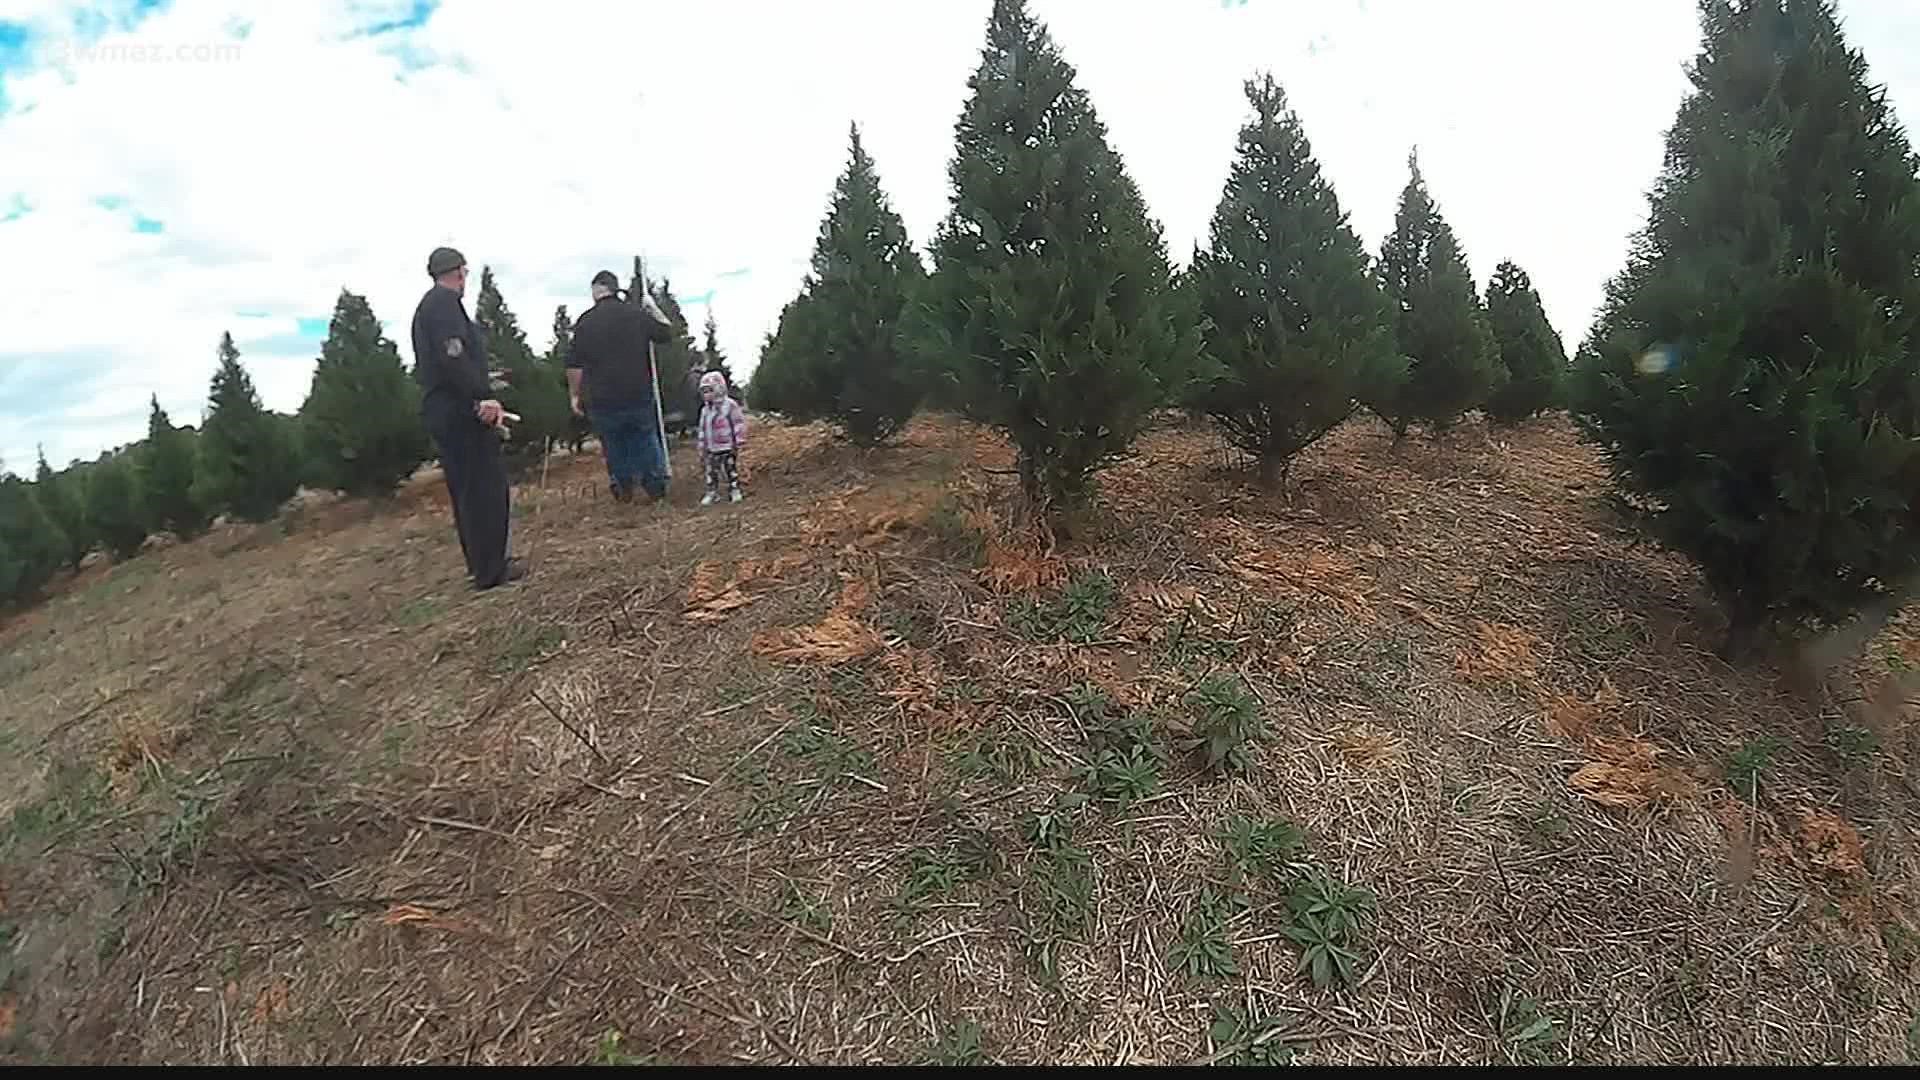 Roberts Christmas Tree Farm owner Mike Roberts says his fresh trees can last about four and a half to five weeks, so now is the best time to buy.